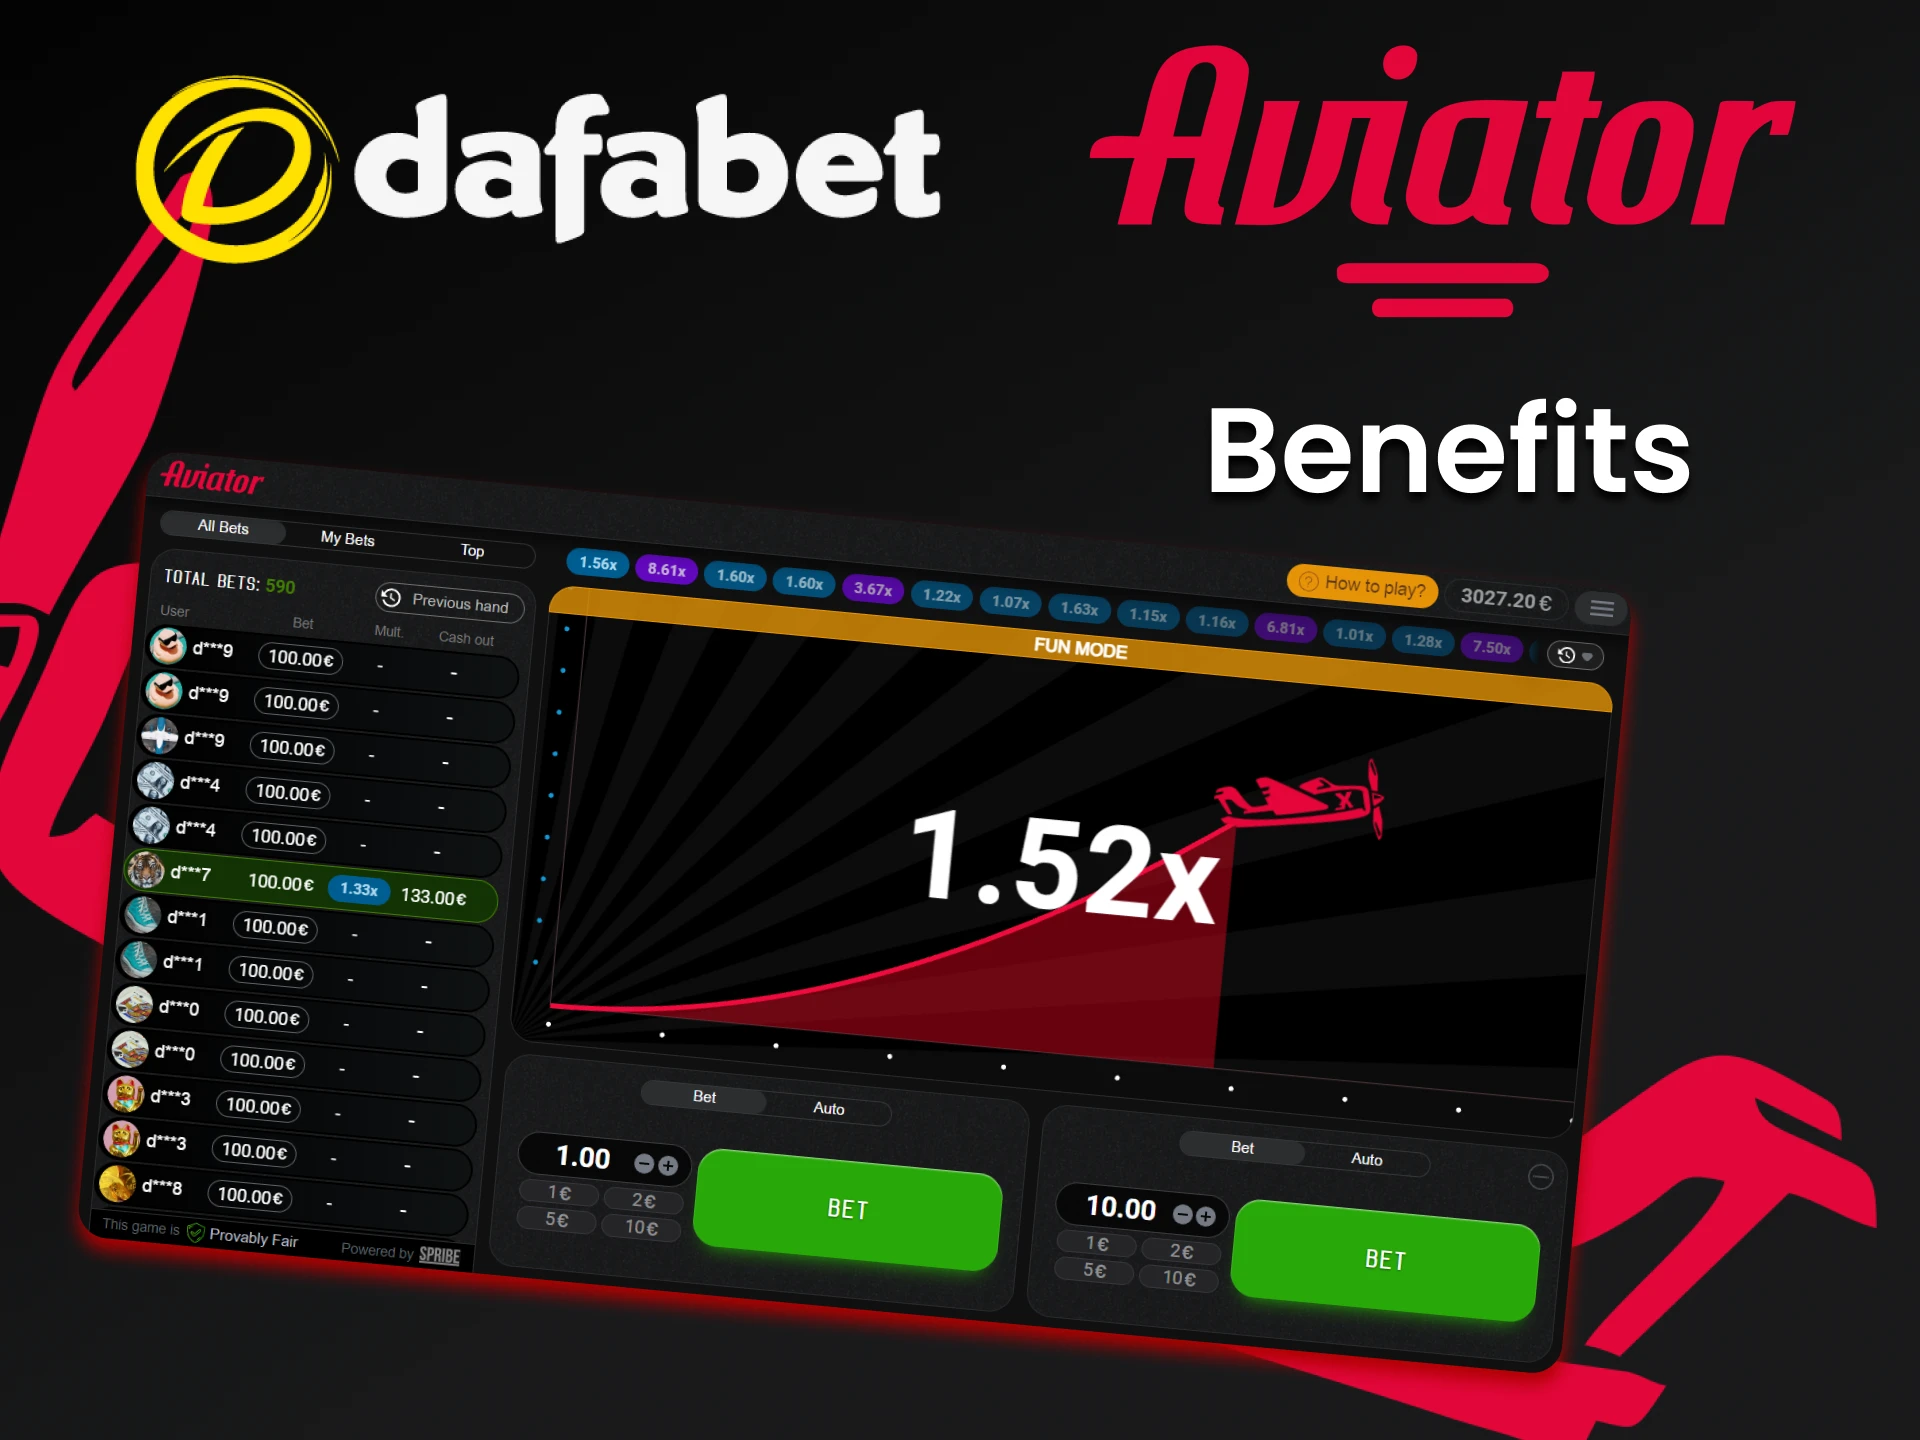 Playing Aviator on Dafabet will surprise you.